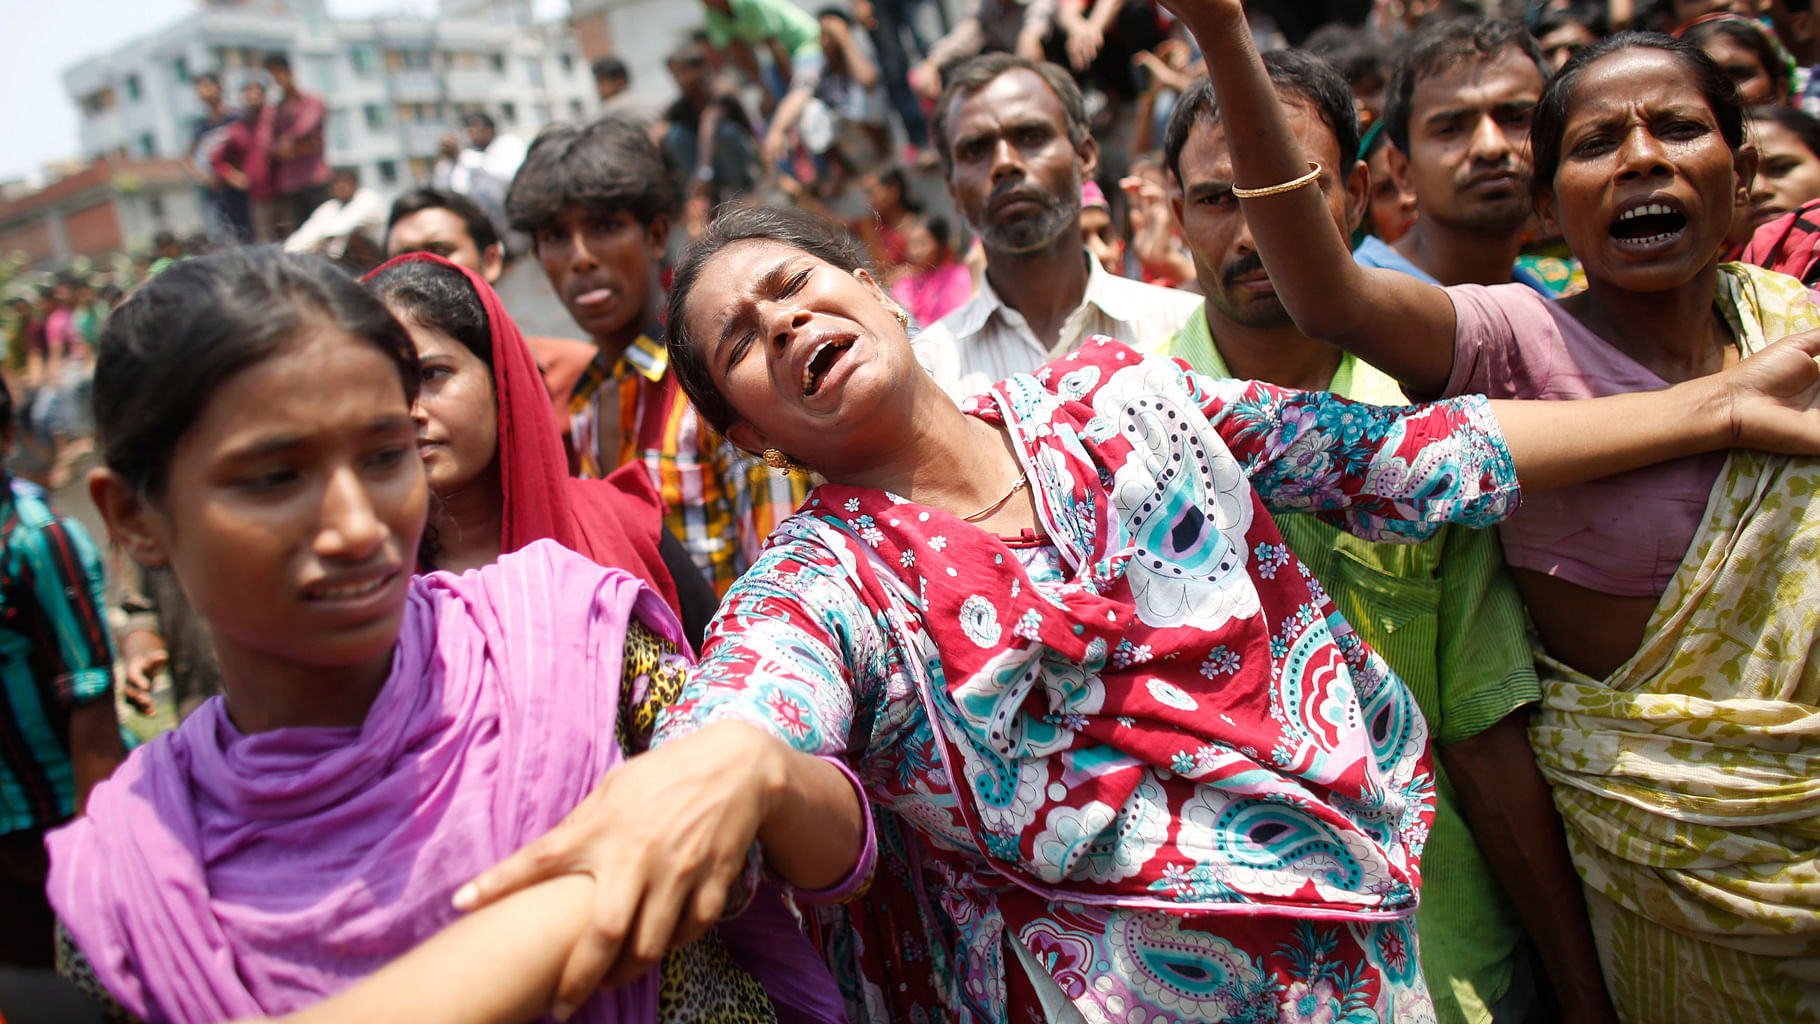  Rana Plaza complex in Bangladesh that collapsed more than three years ago, killing 1,136 garment workers. Image used for representation.